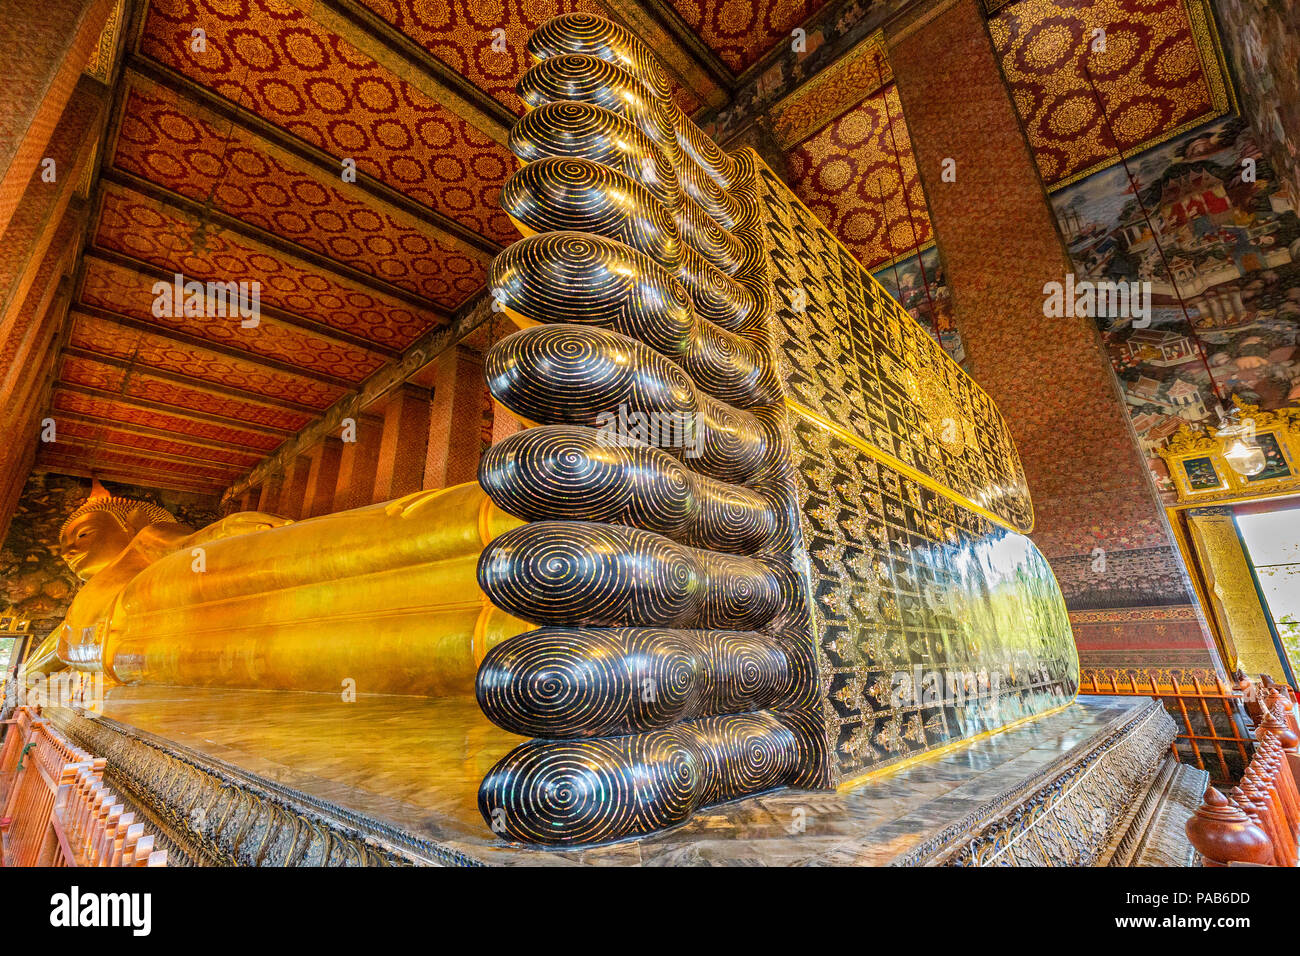 Golden reclining Buddha in the Temple of Wat Pho, in Bangkok, Thailand. Stock Photo